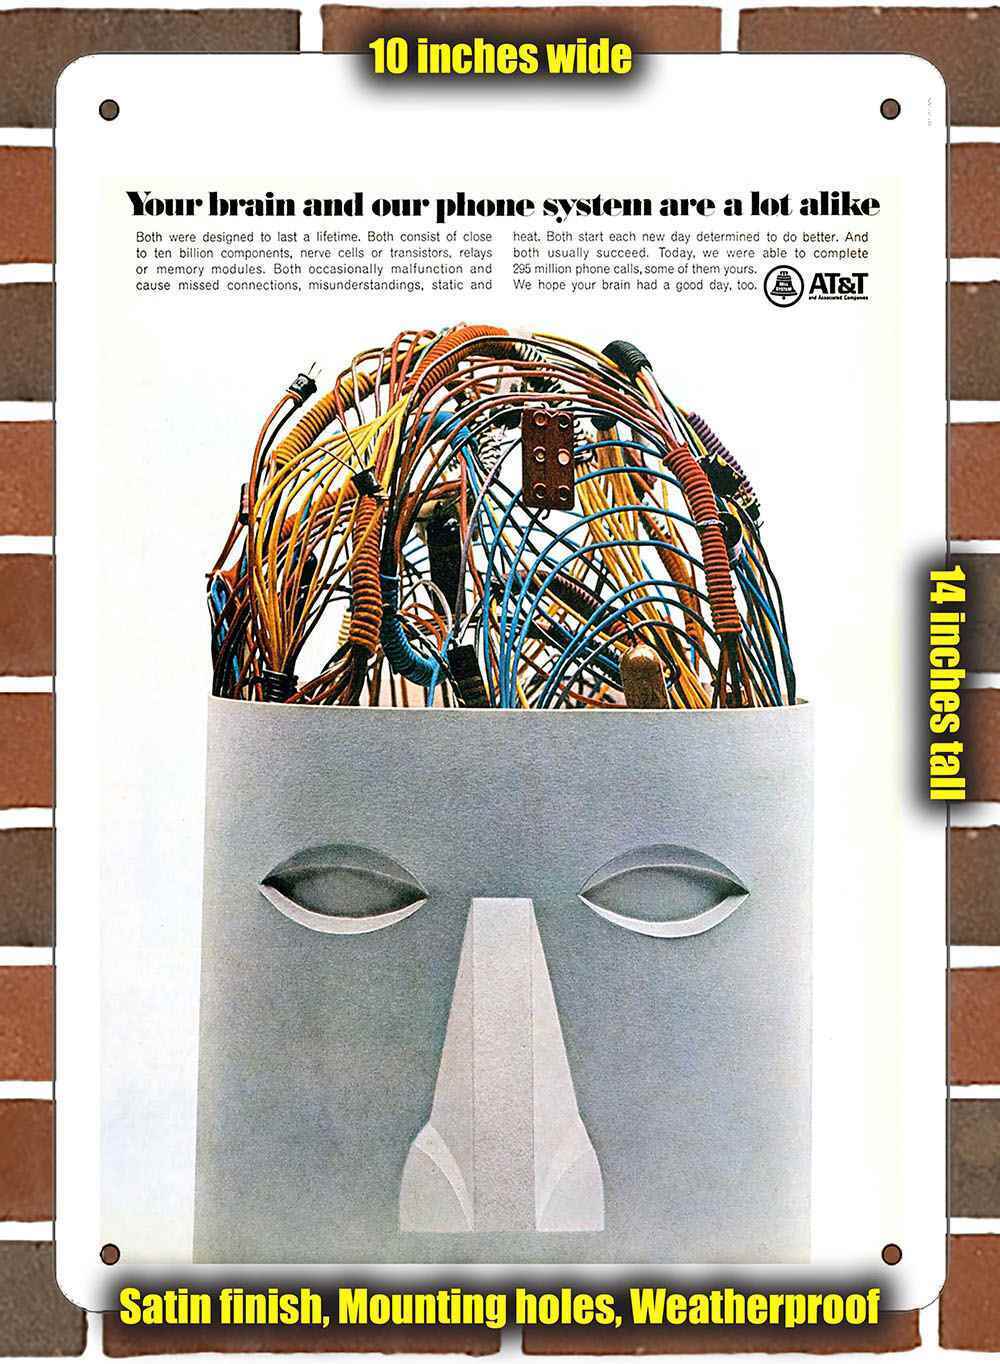 Metal Sign - 1967 AT&T Your Brain and Our Phone System- 10x14 inches